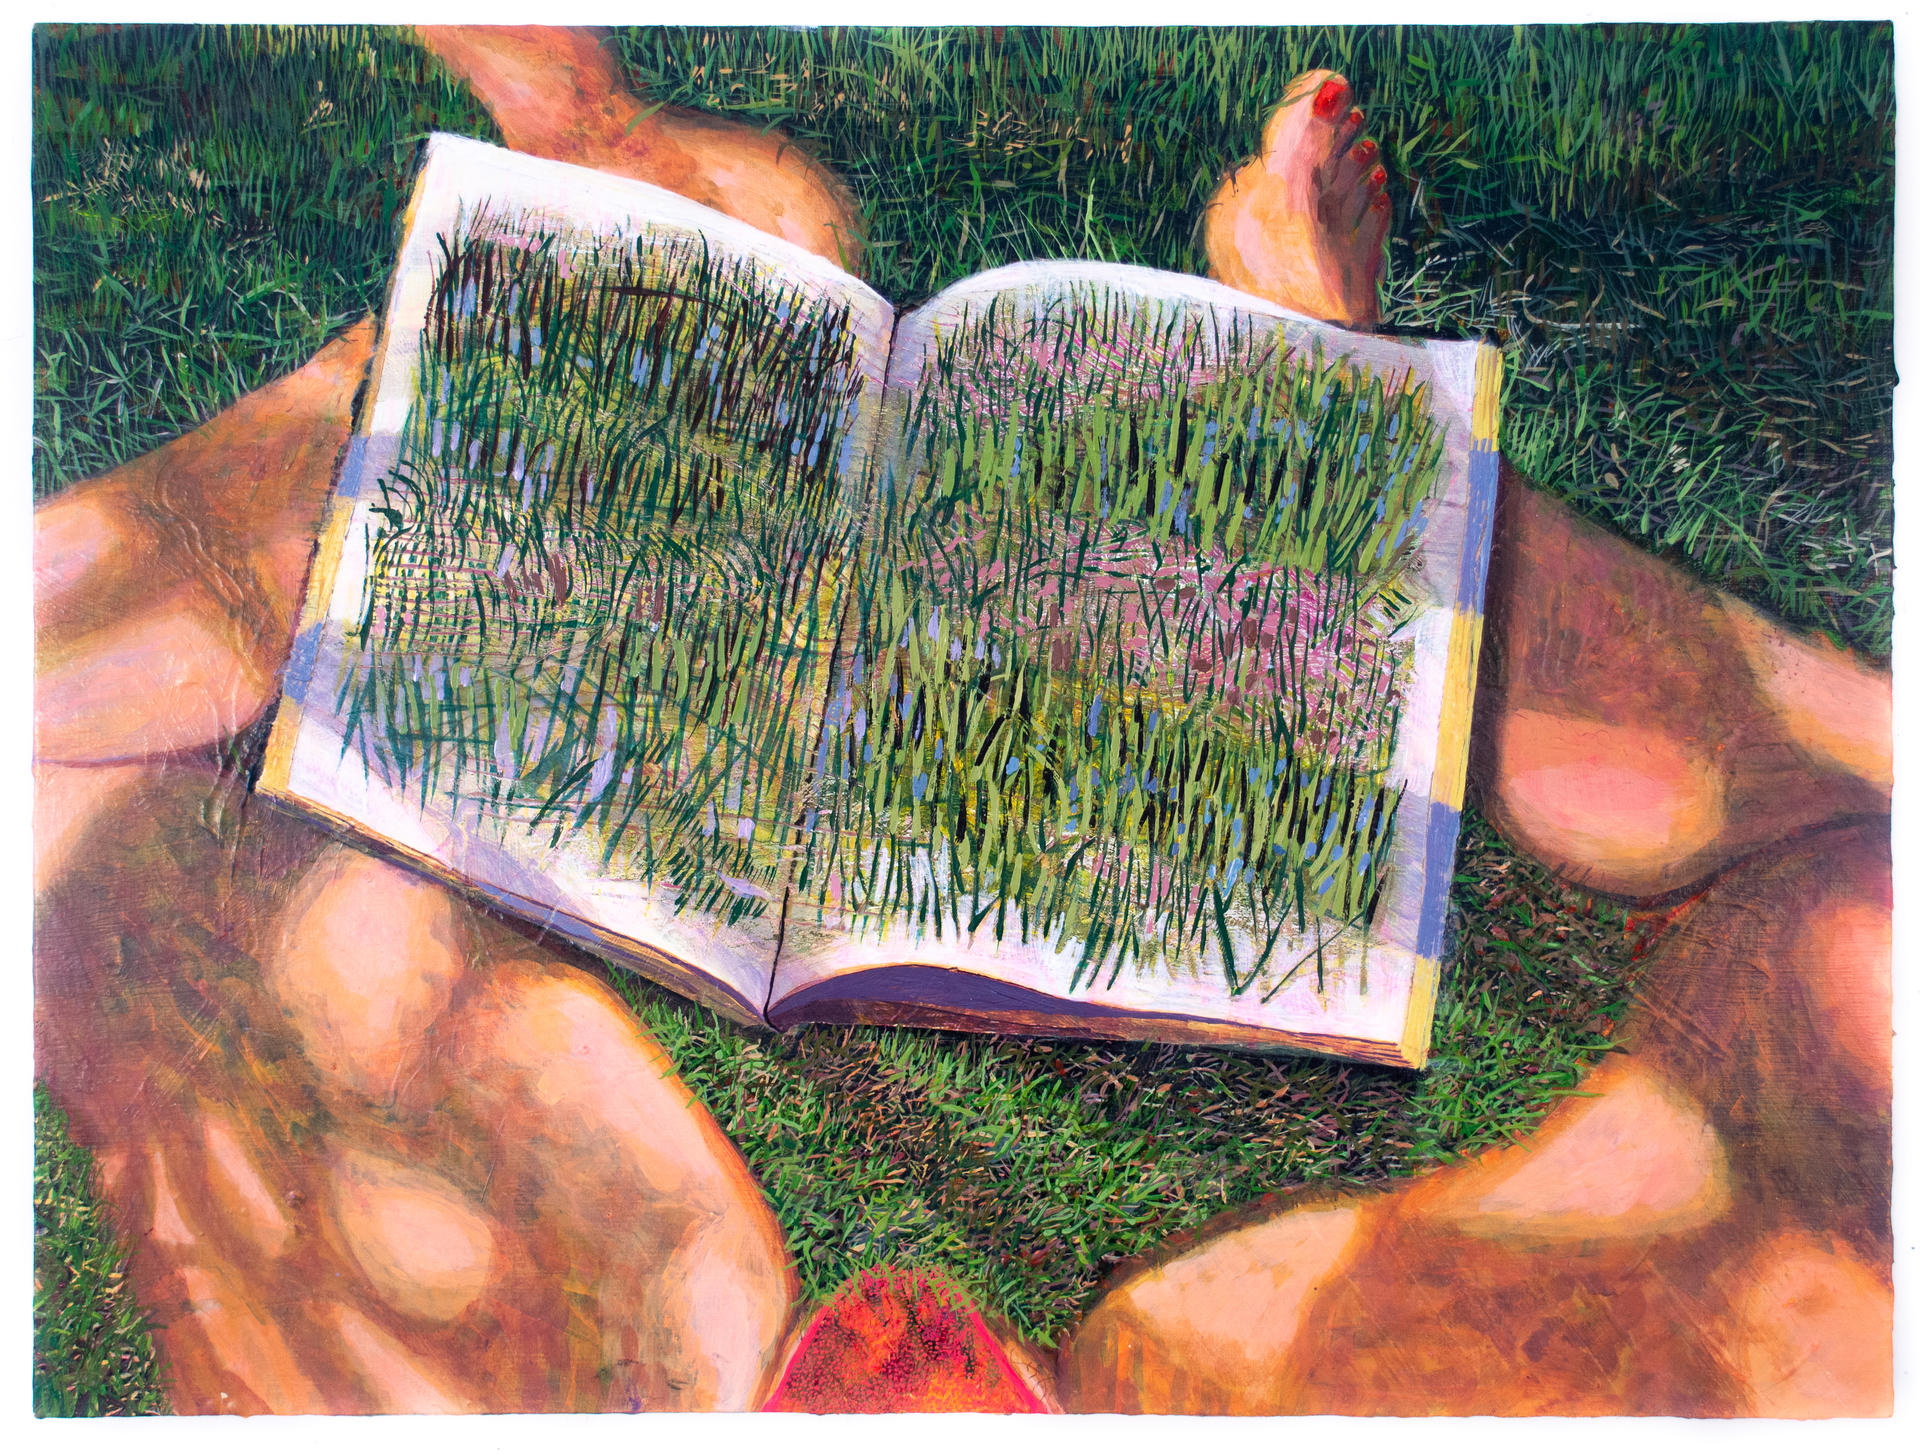 A painting of a first person perspective of a woman's bare legs sitting in the grass looking at a book that illustrates a grass drawing.